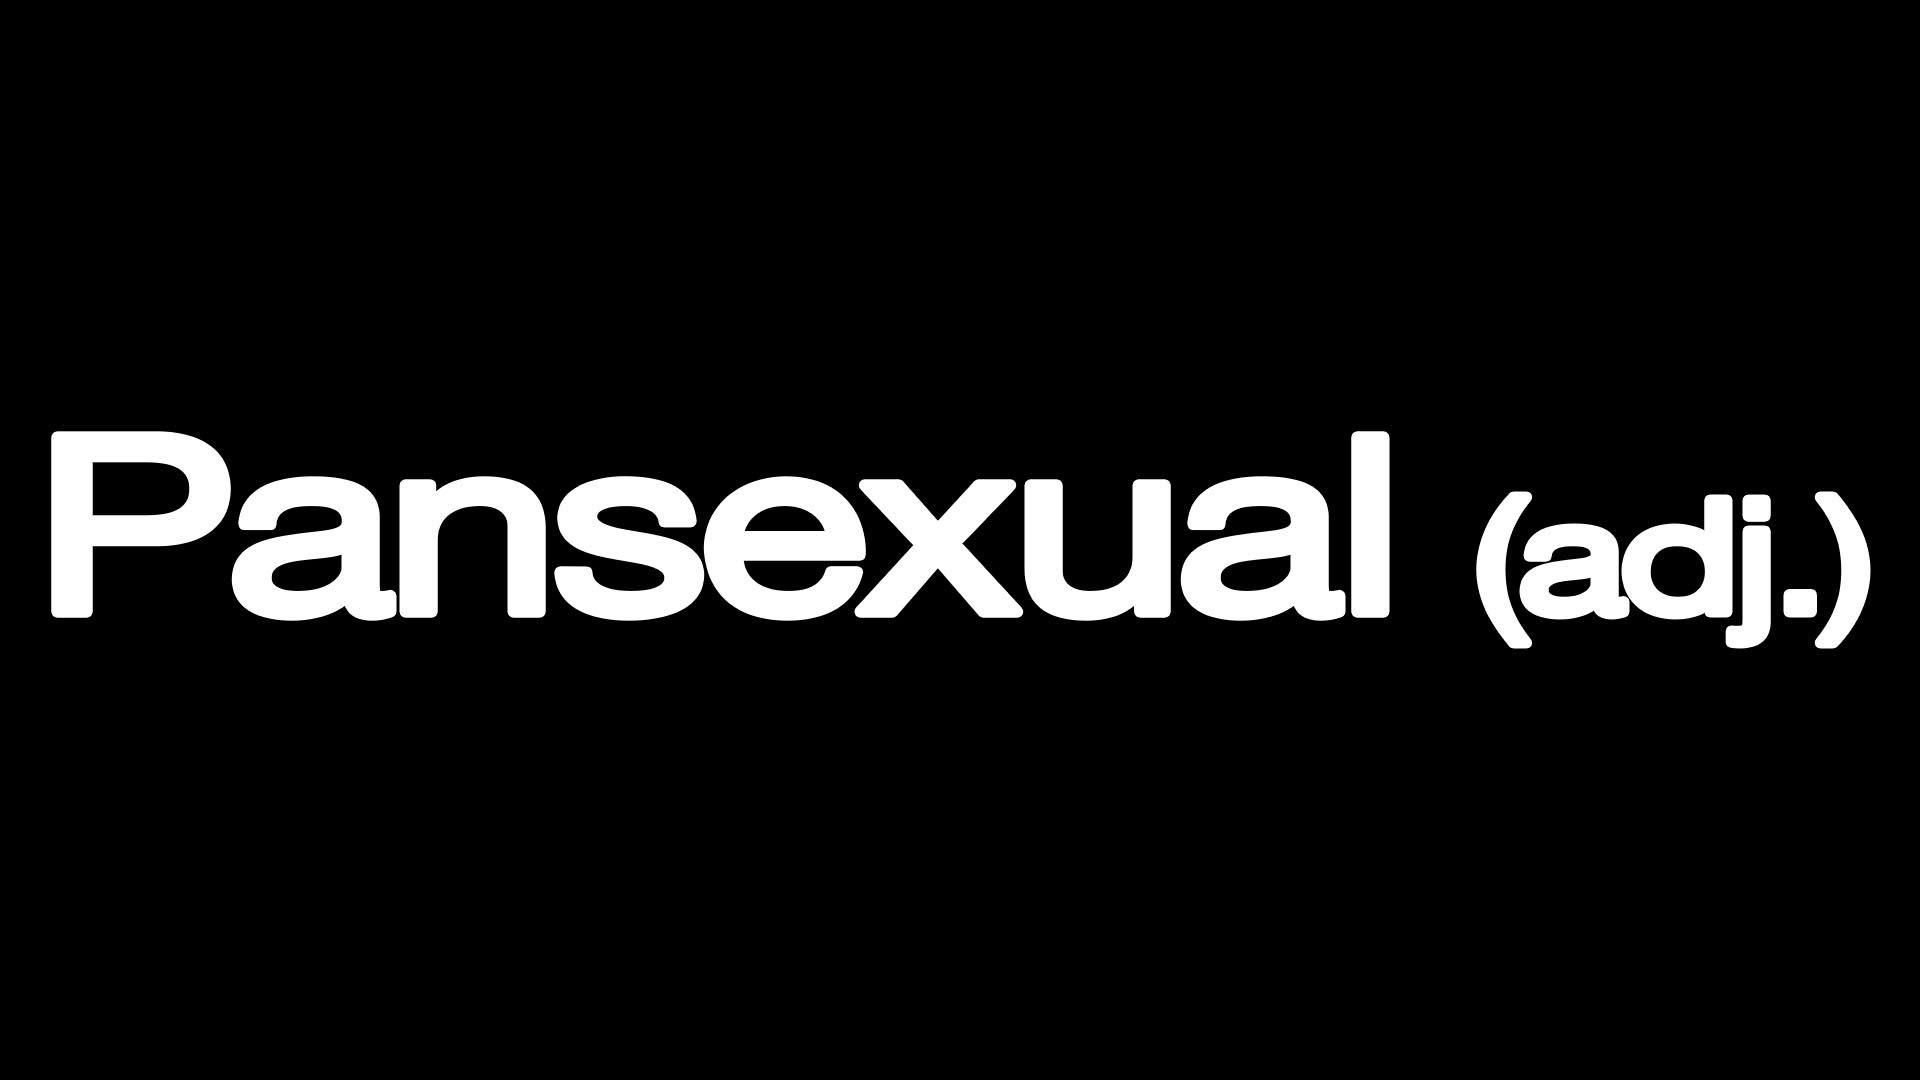 What is a PANSEXUAL?